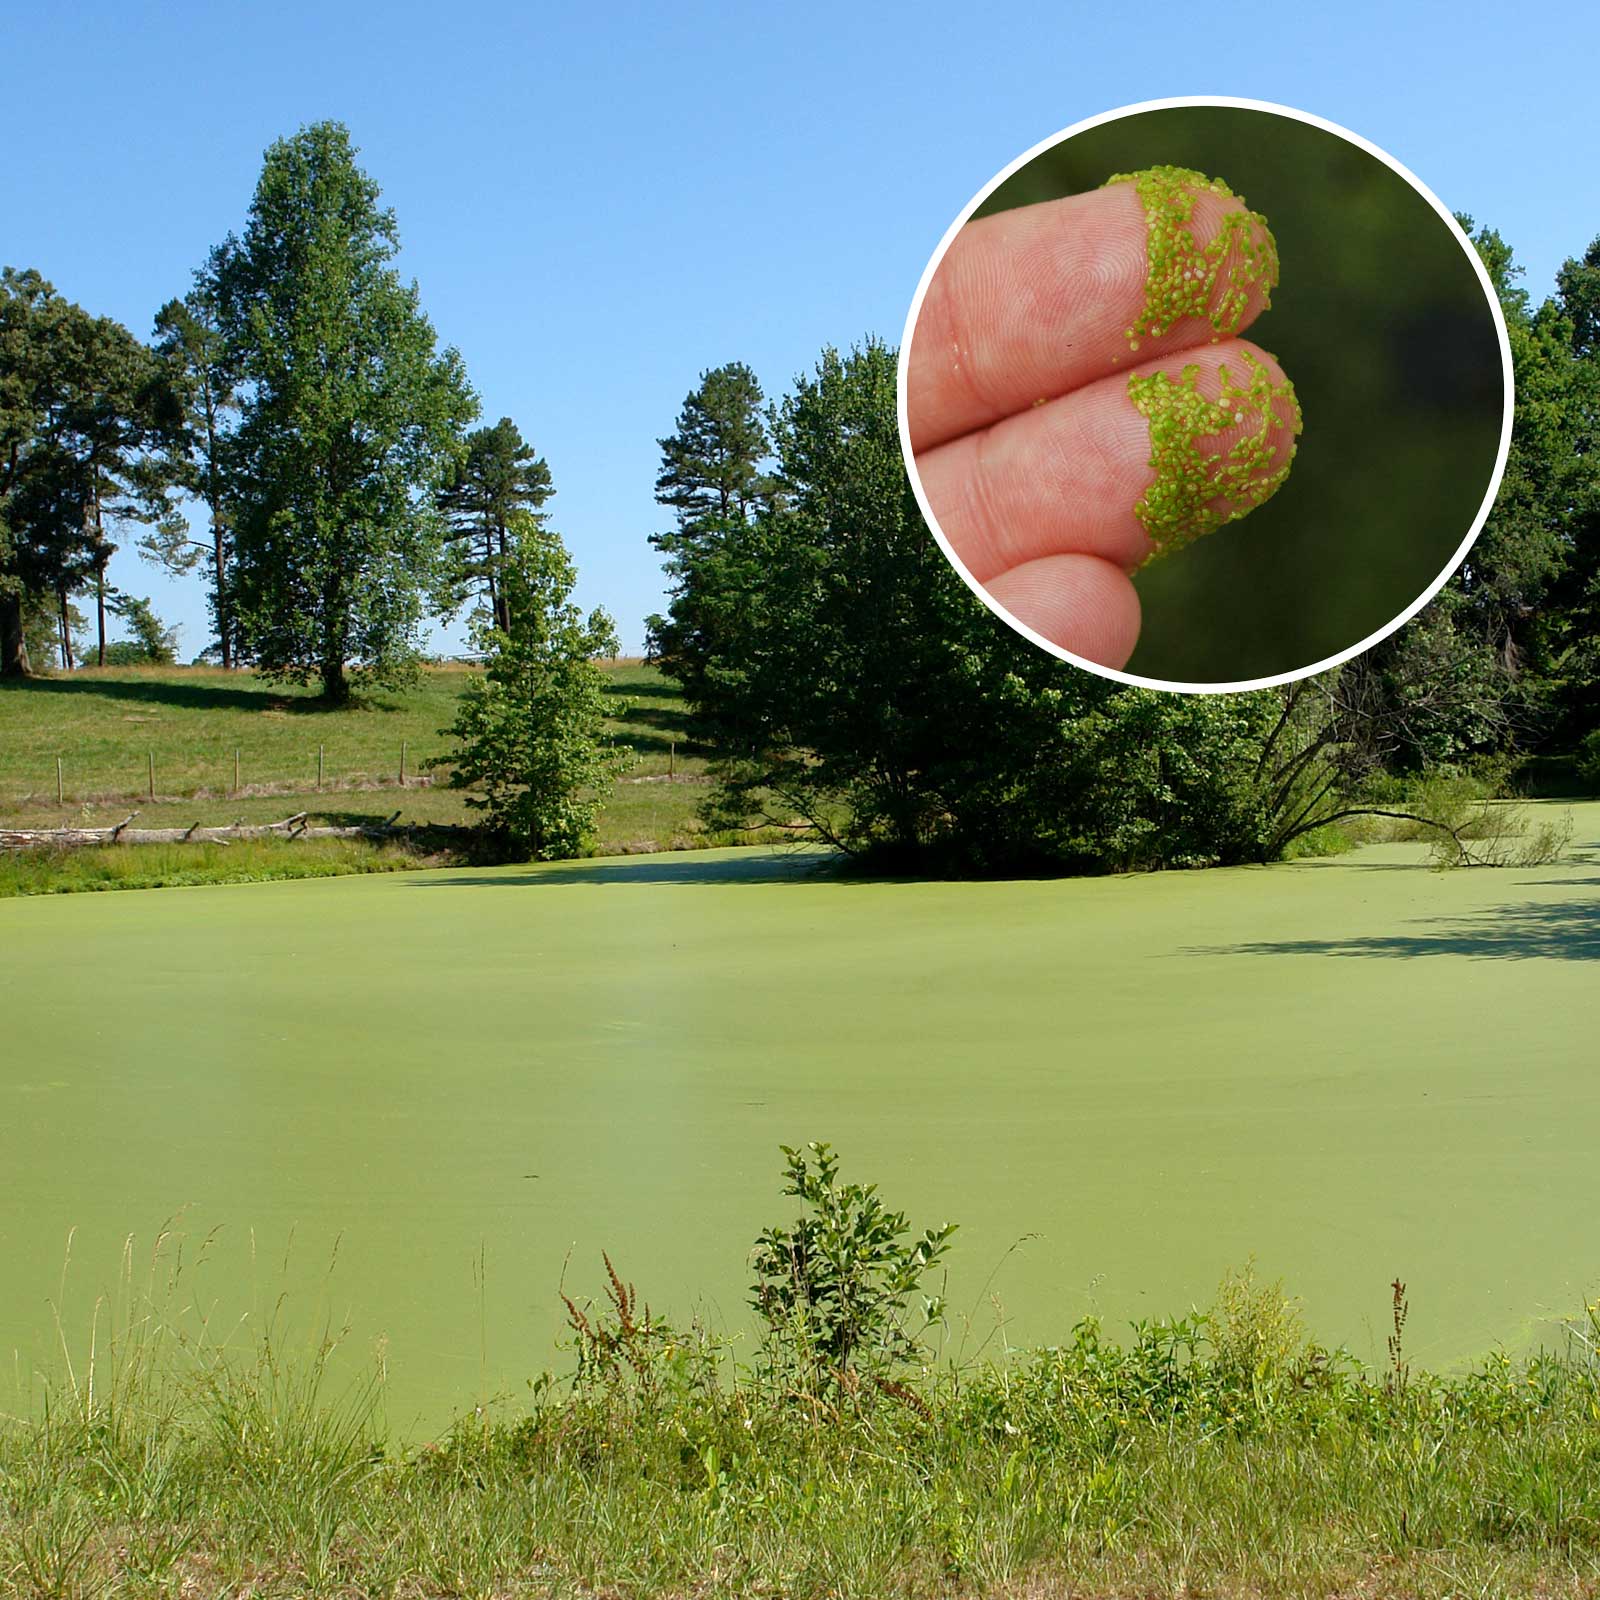 Watermeal infestation in a pond